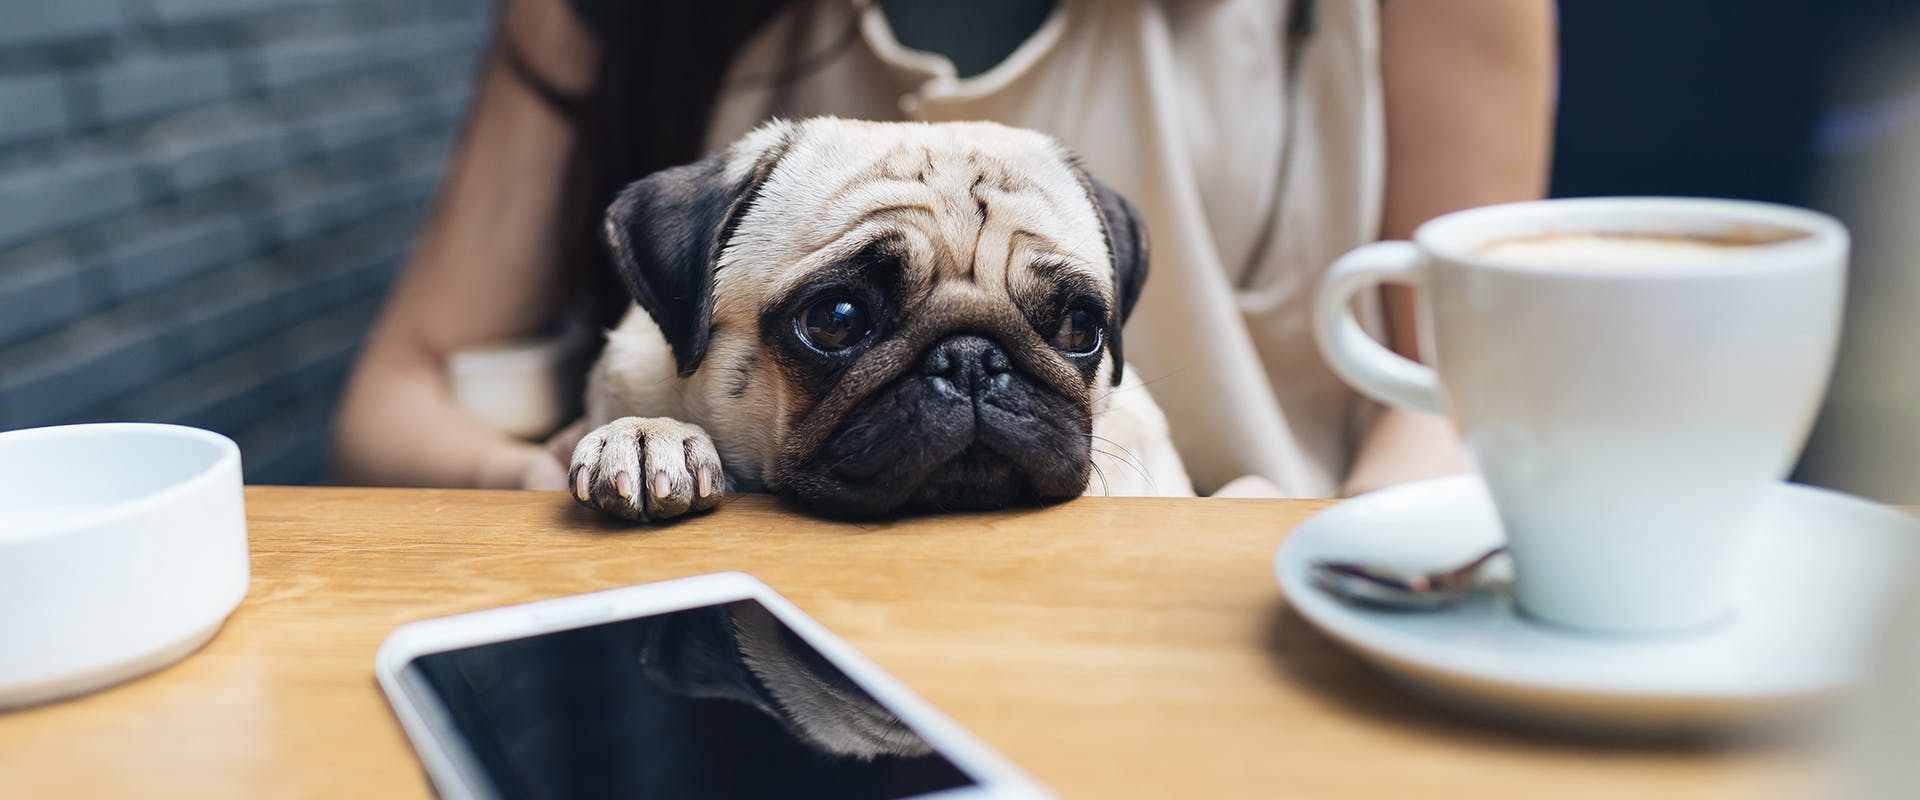 A woman sitting in a cafe, a pug on her lap